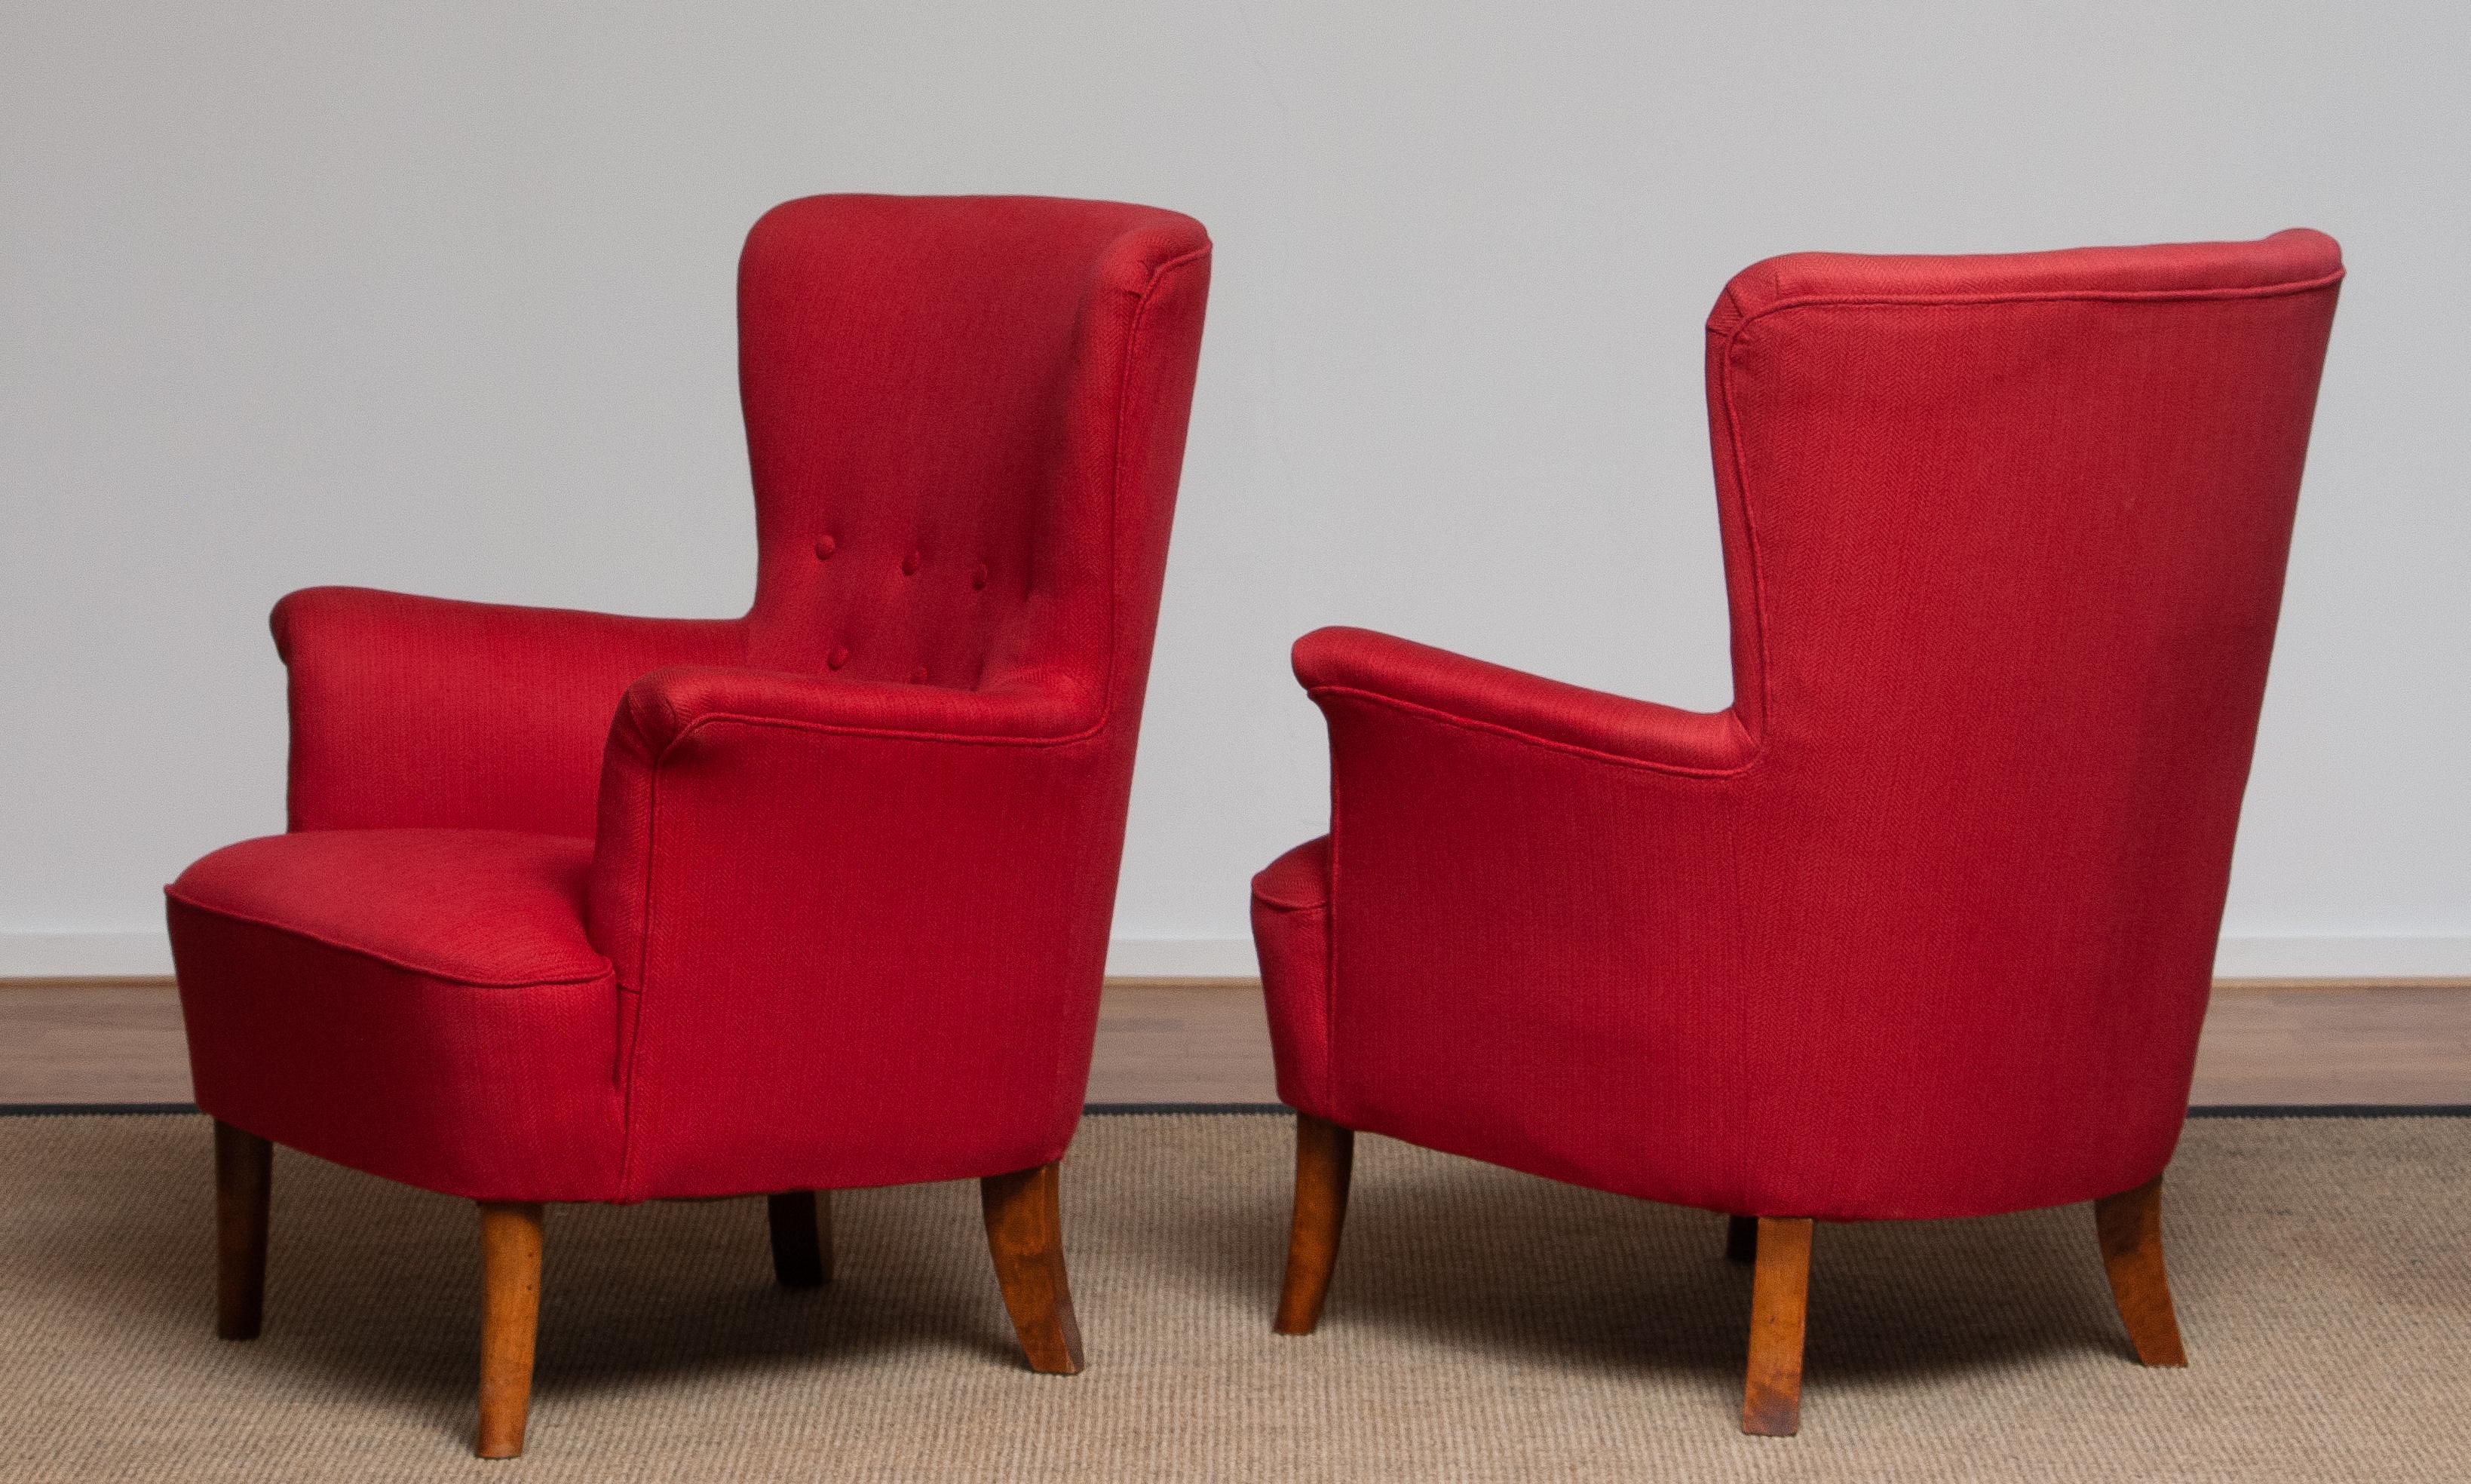 Mid-20th Century 1940s, Pair of Fuchsia Easy or Lounge Chair by Carl Malmsten for OH Sjögren